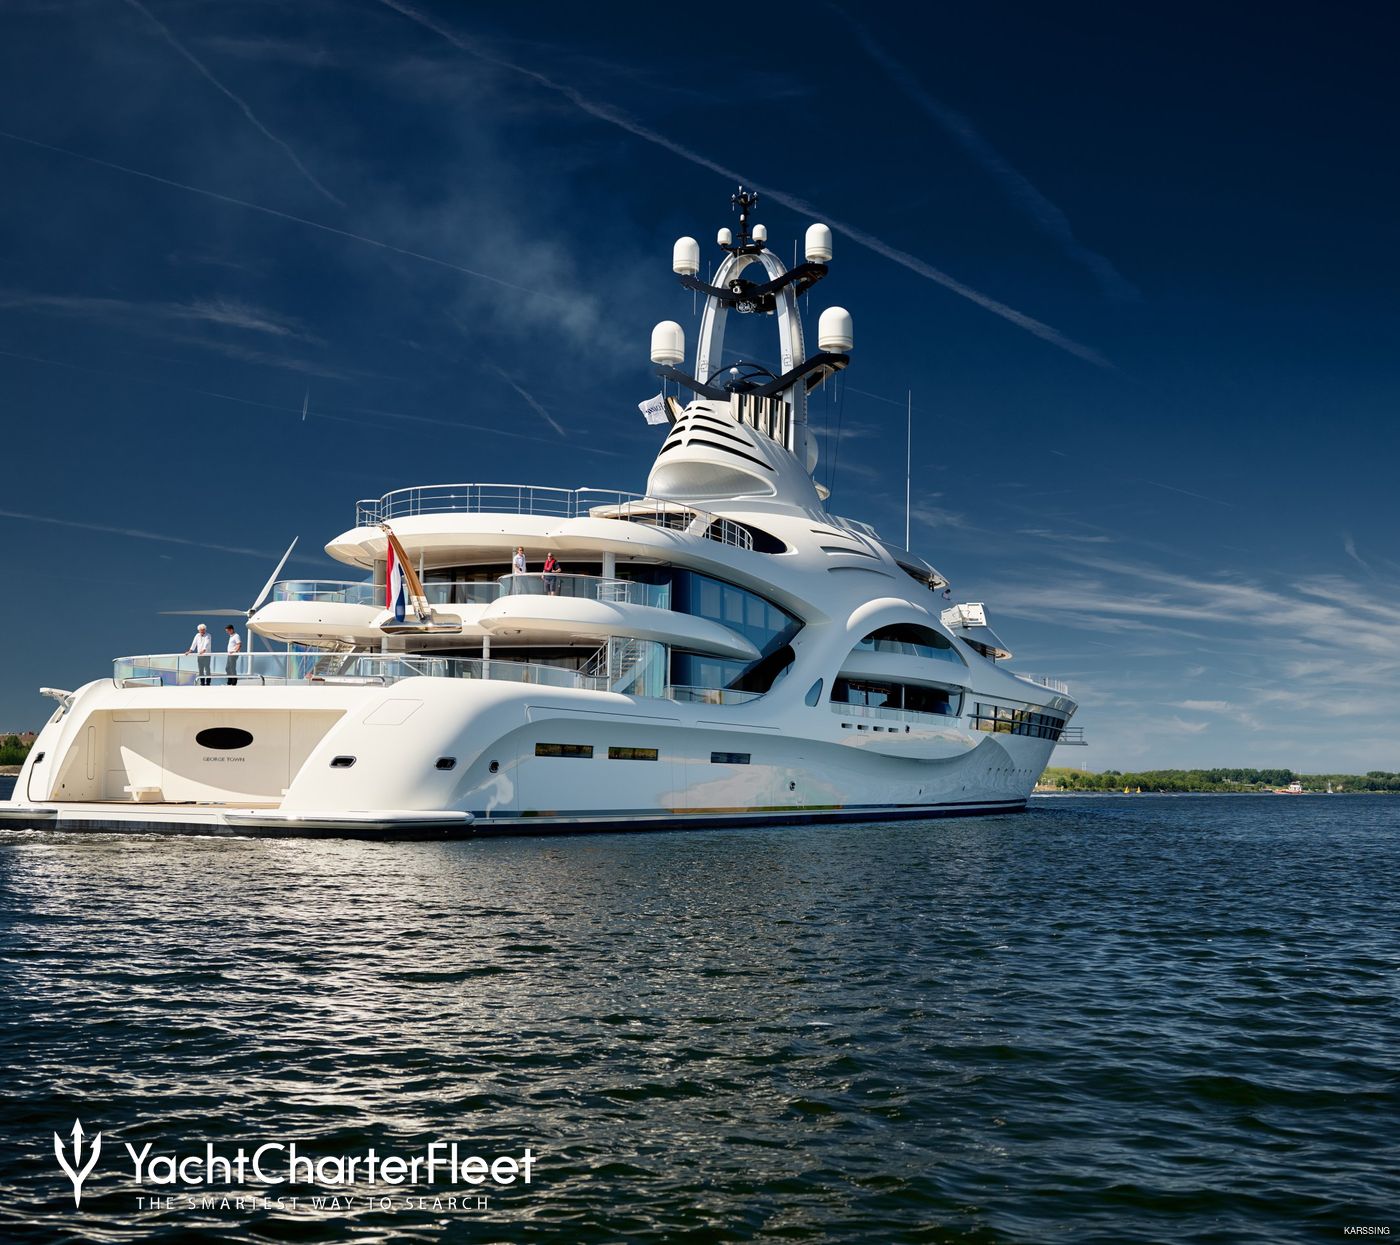 feadship largest yacht